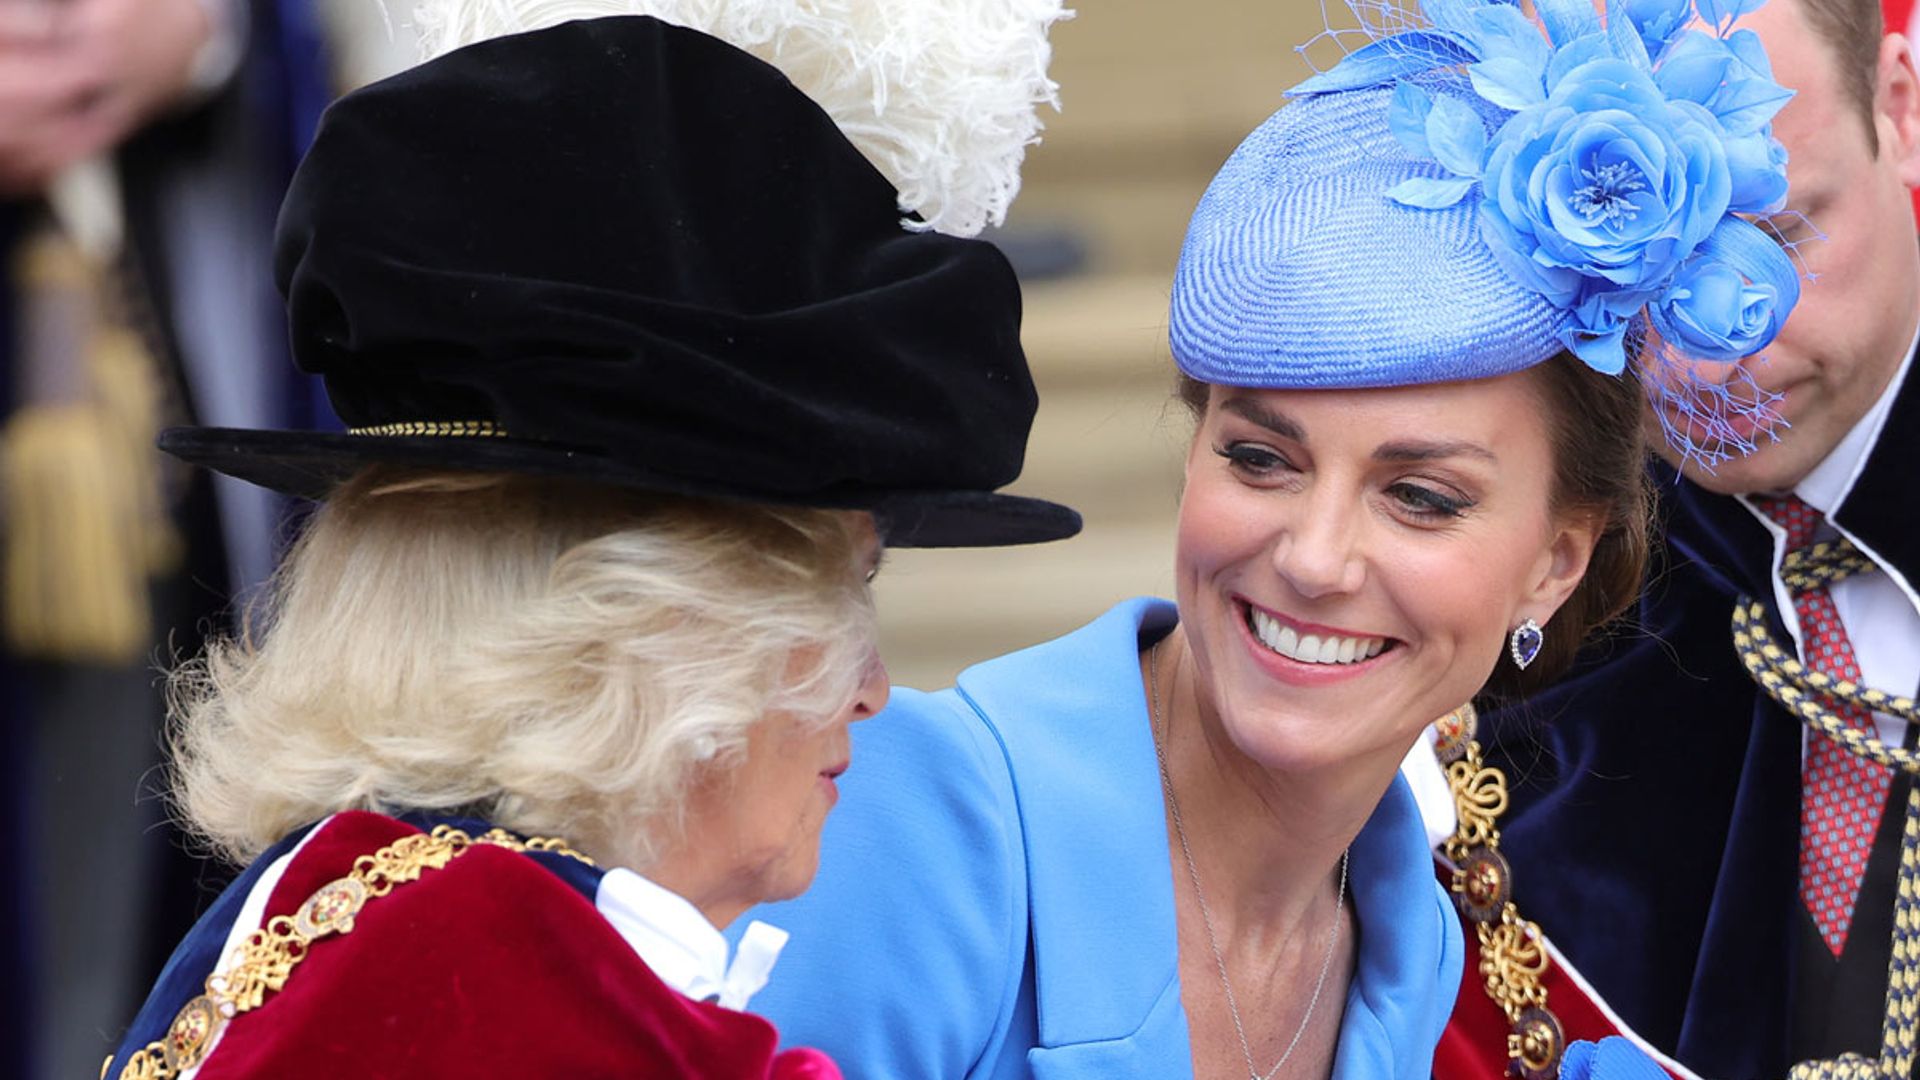 Kate Middleton in Paris Hair & Heels With Prince William [PHOTOS